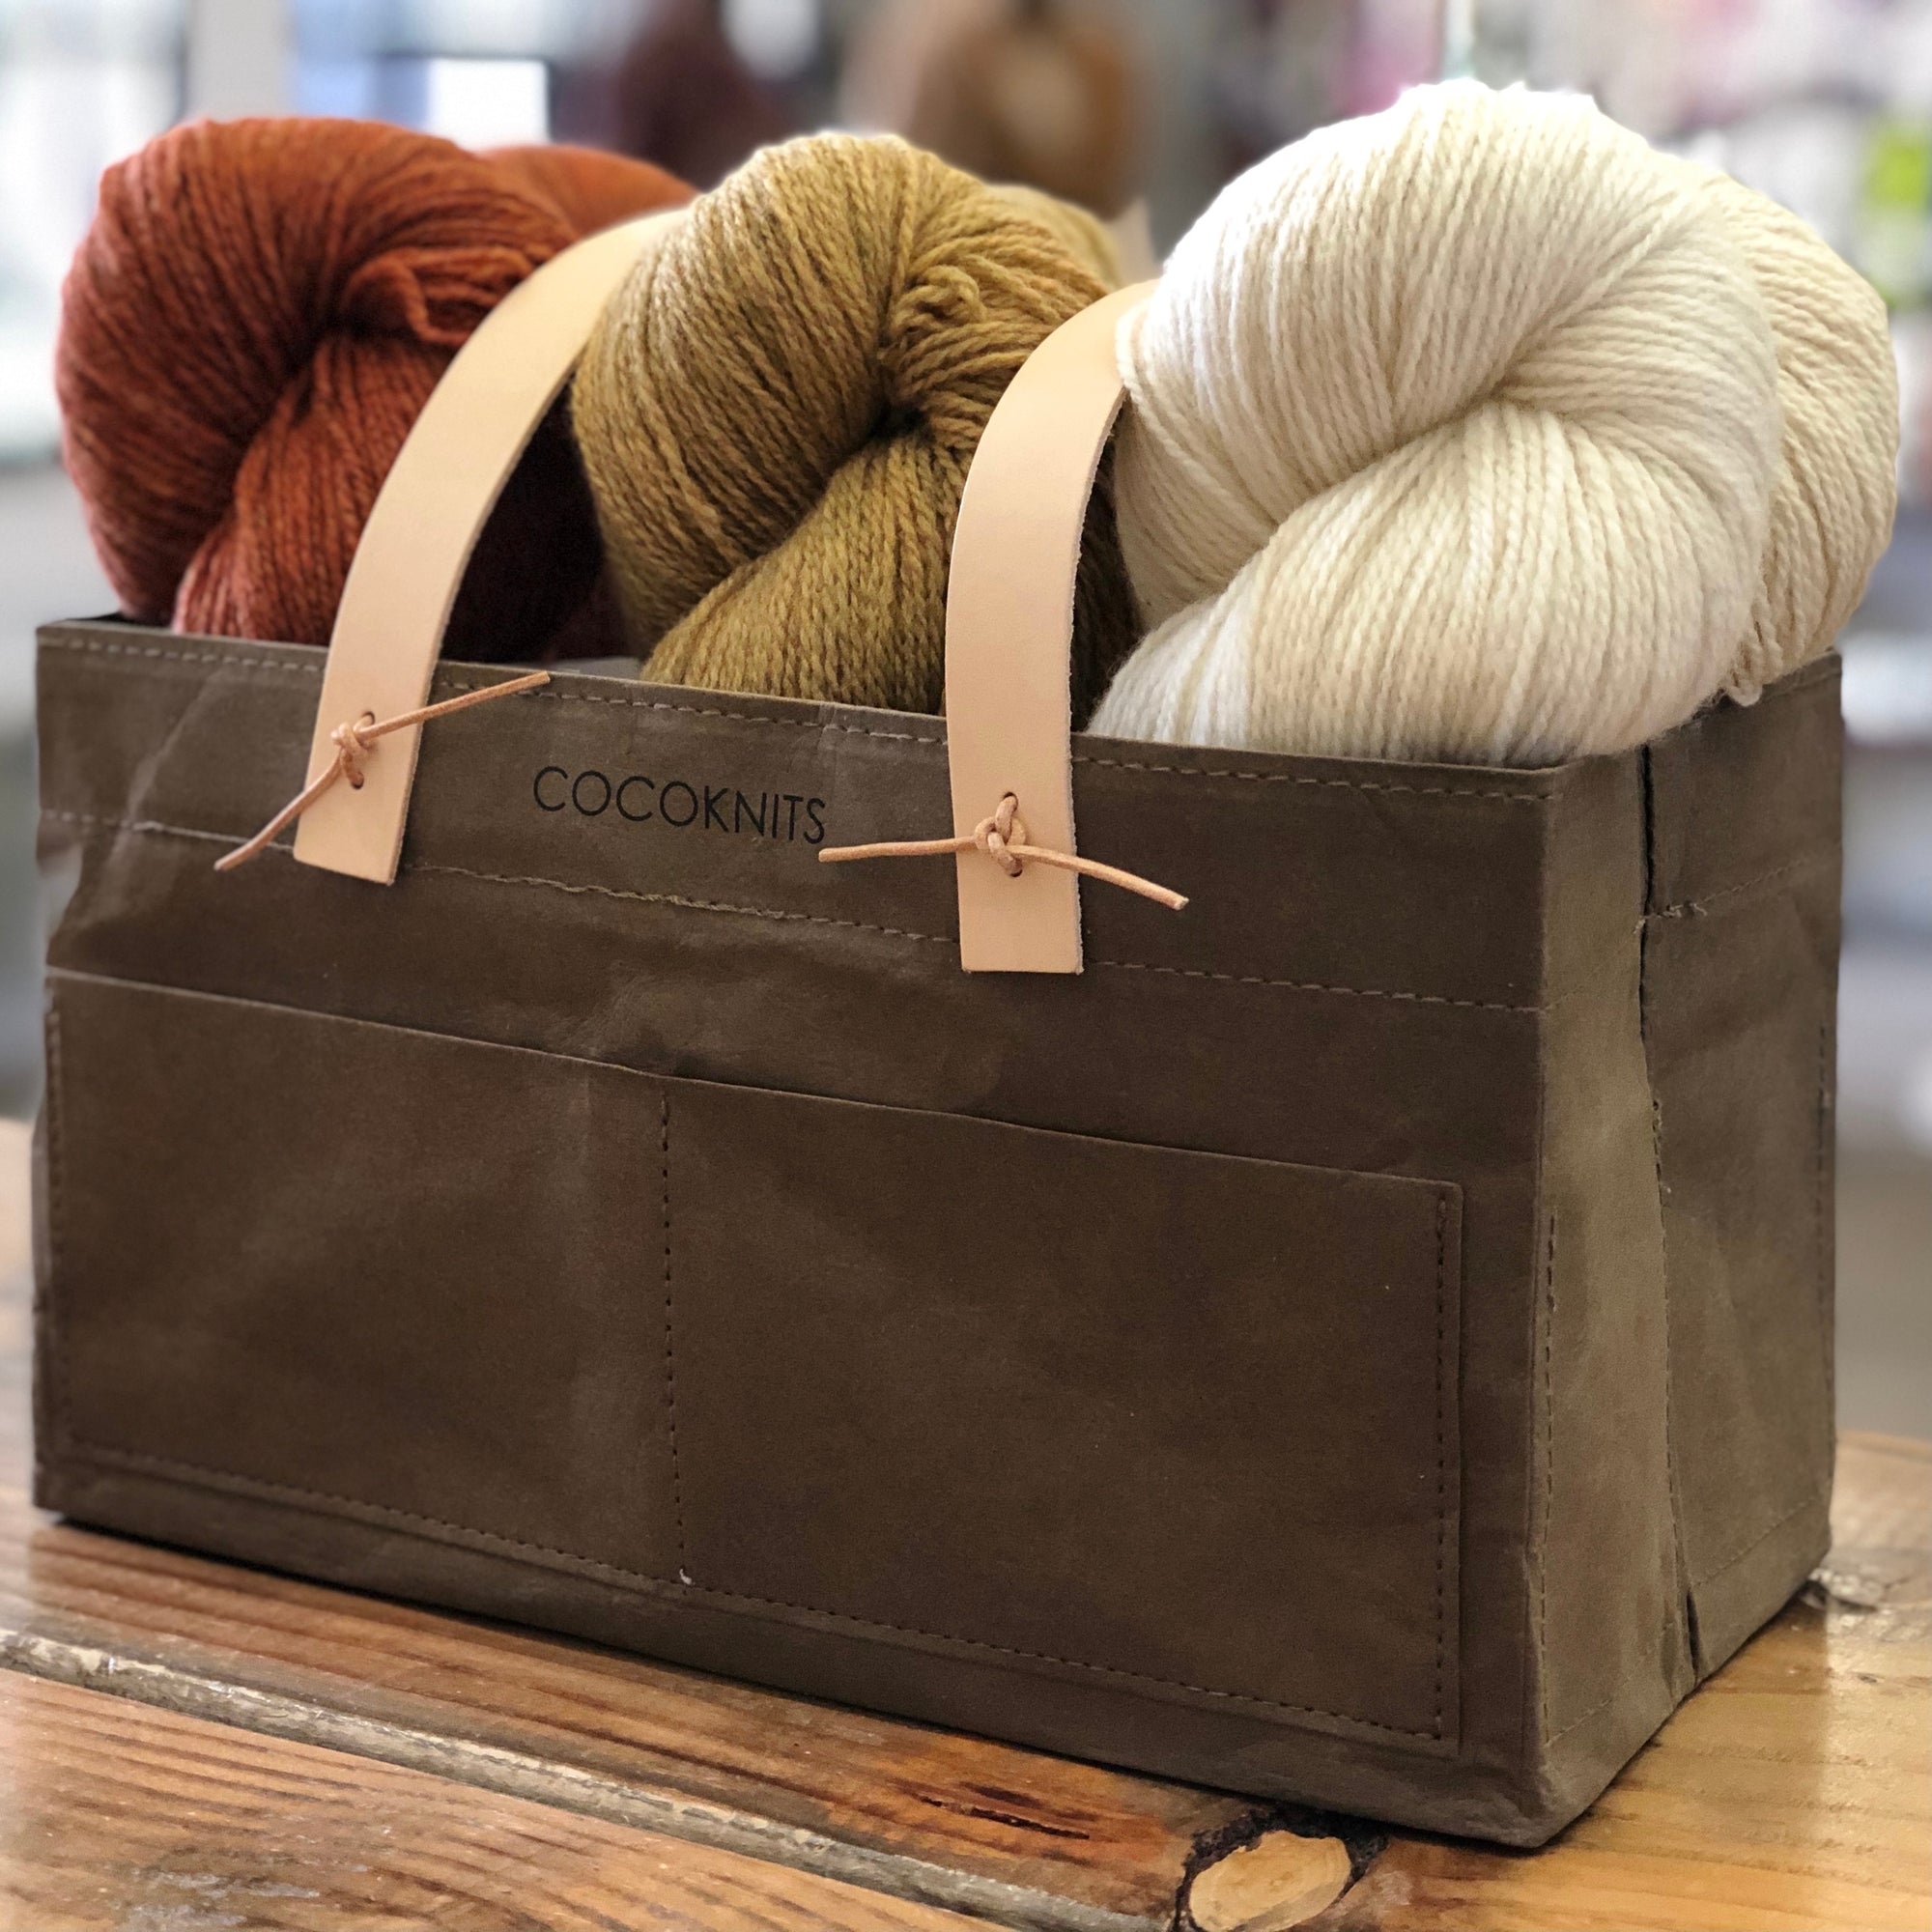 Crochet, Sew & Knitting Project Bags - Apricot Yarn & Supply Tagged tools